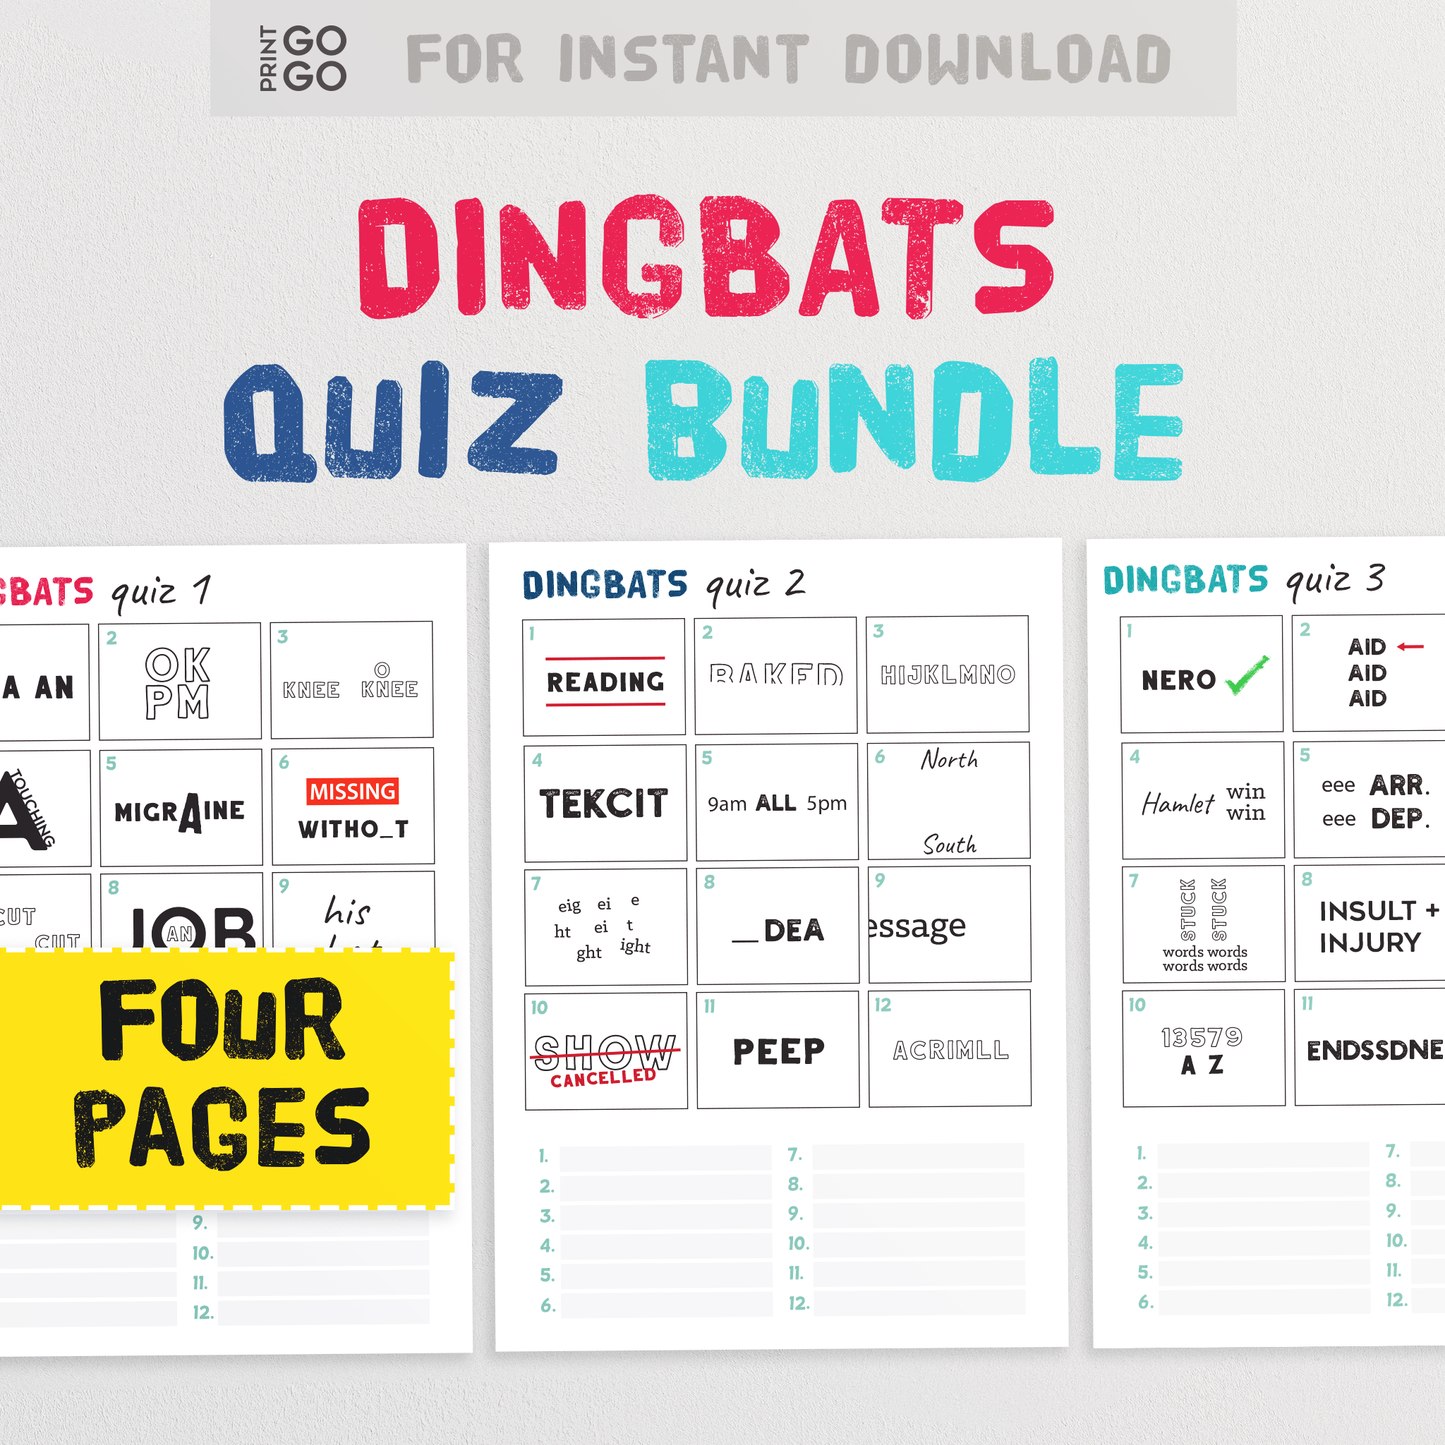 Dingbats Picture Quiz Puzzles - The Guess the Phrase Game for Families and Friends!